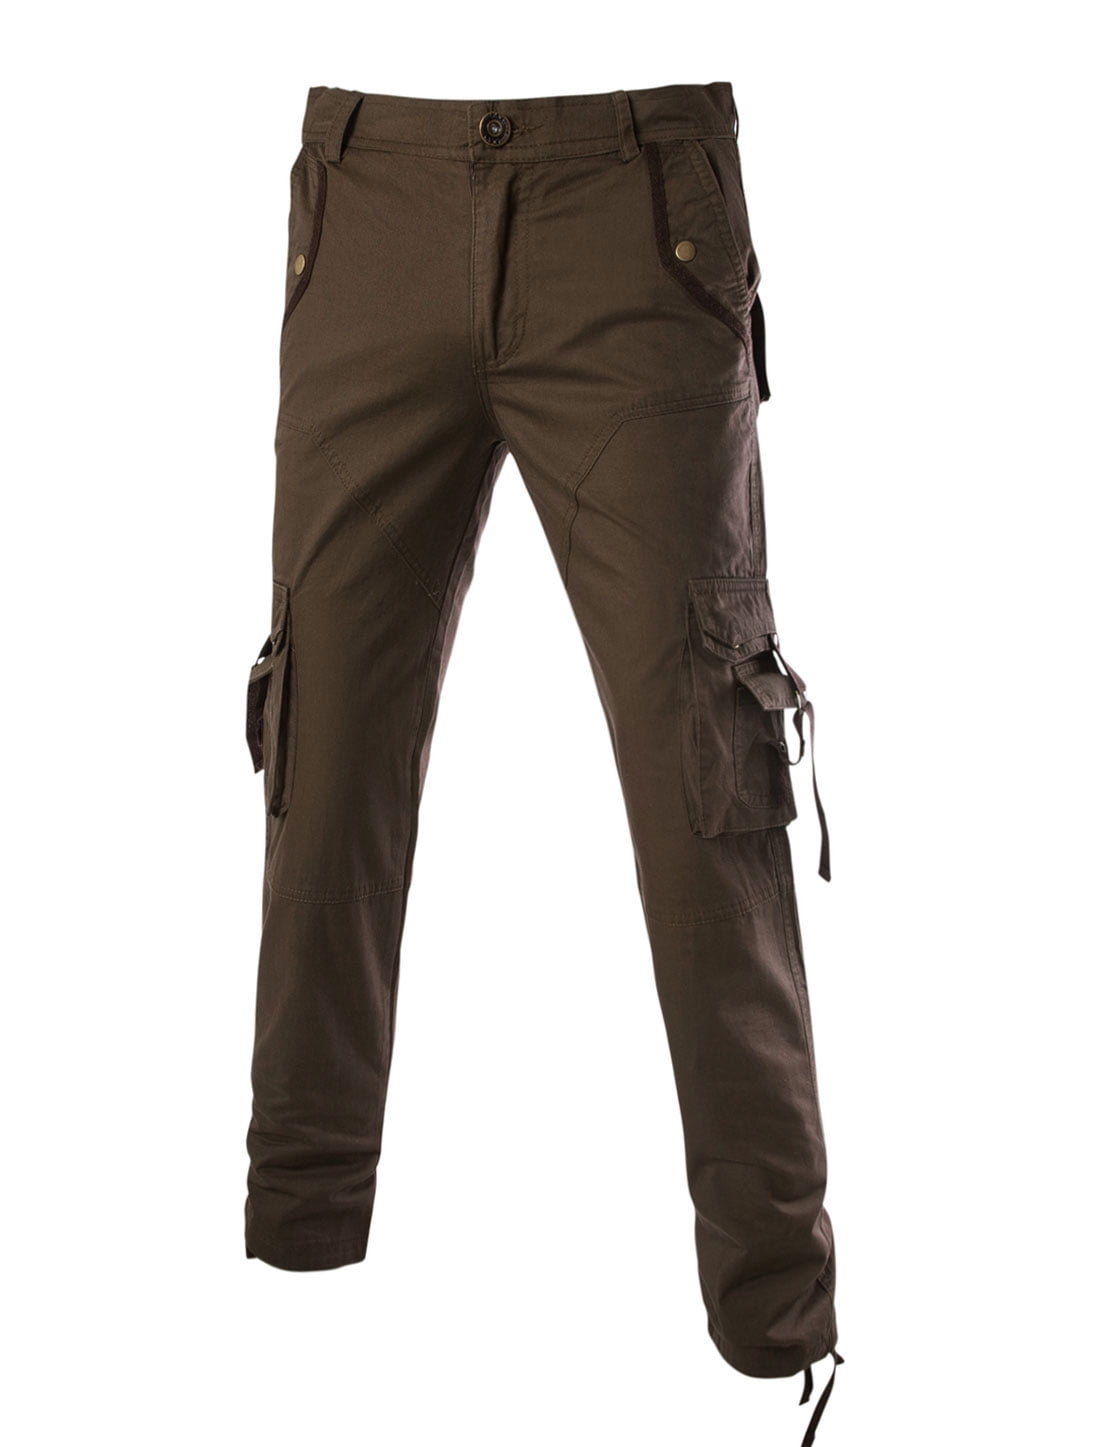 Men Mid Rise Bellowed Pockets Twill Military Casual Cargo Pants Khaki ...